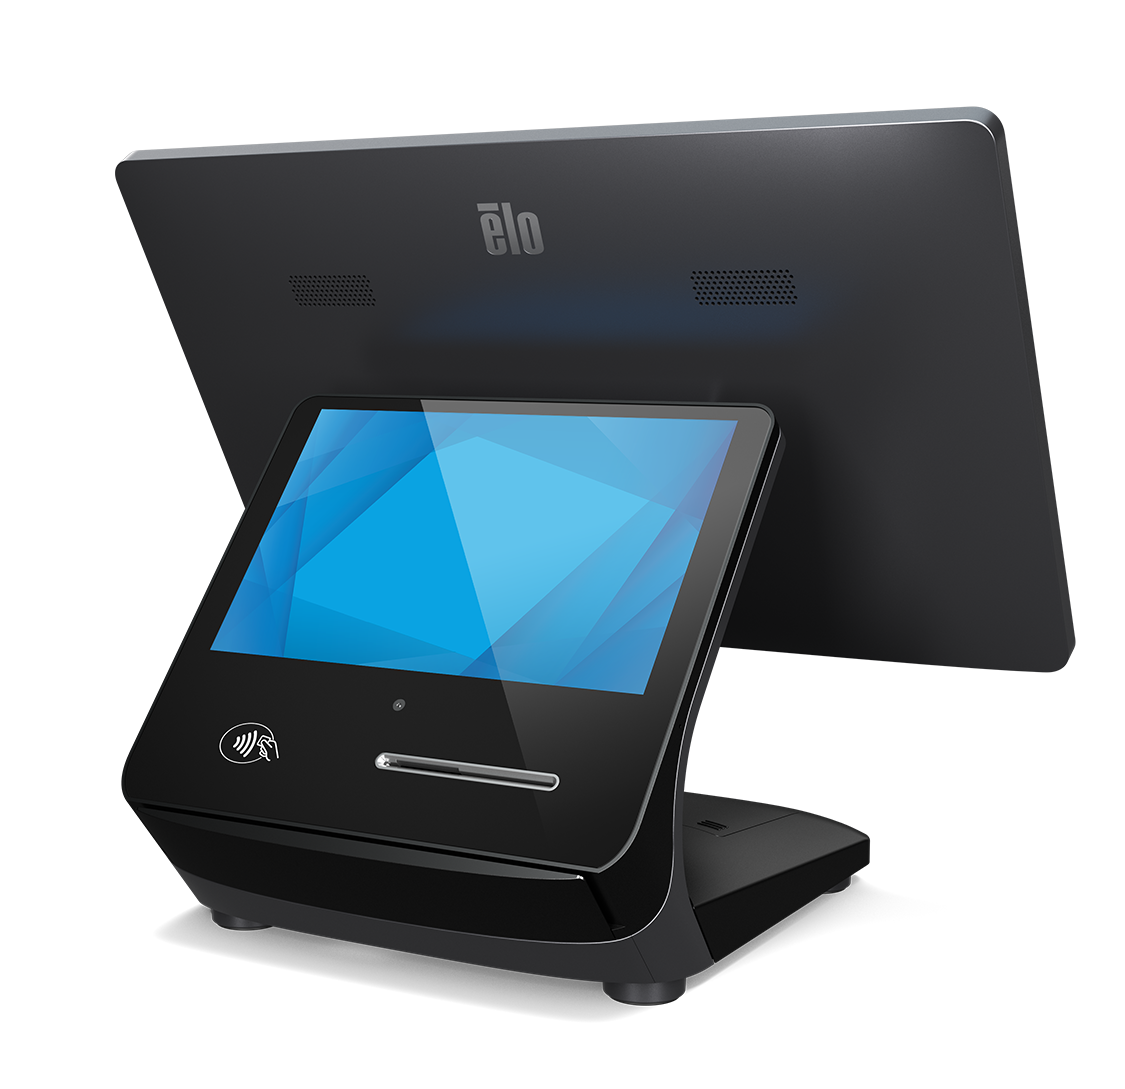 Elo Pay 7-inch POS Terminal integrated with Z70 Stand.